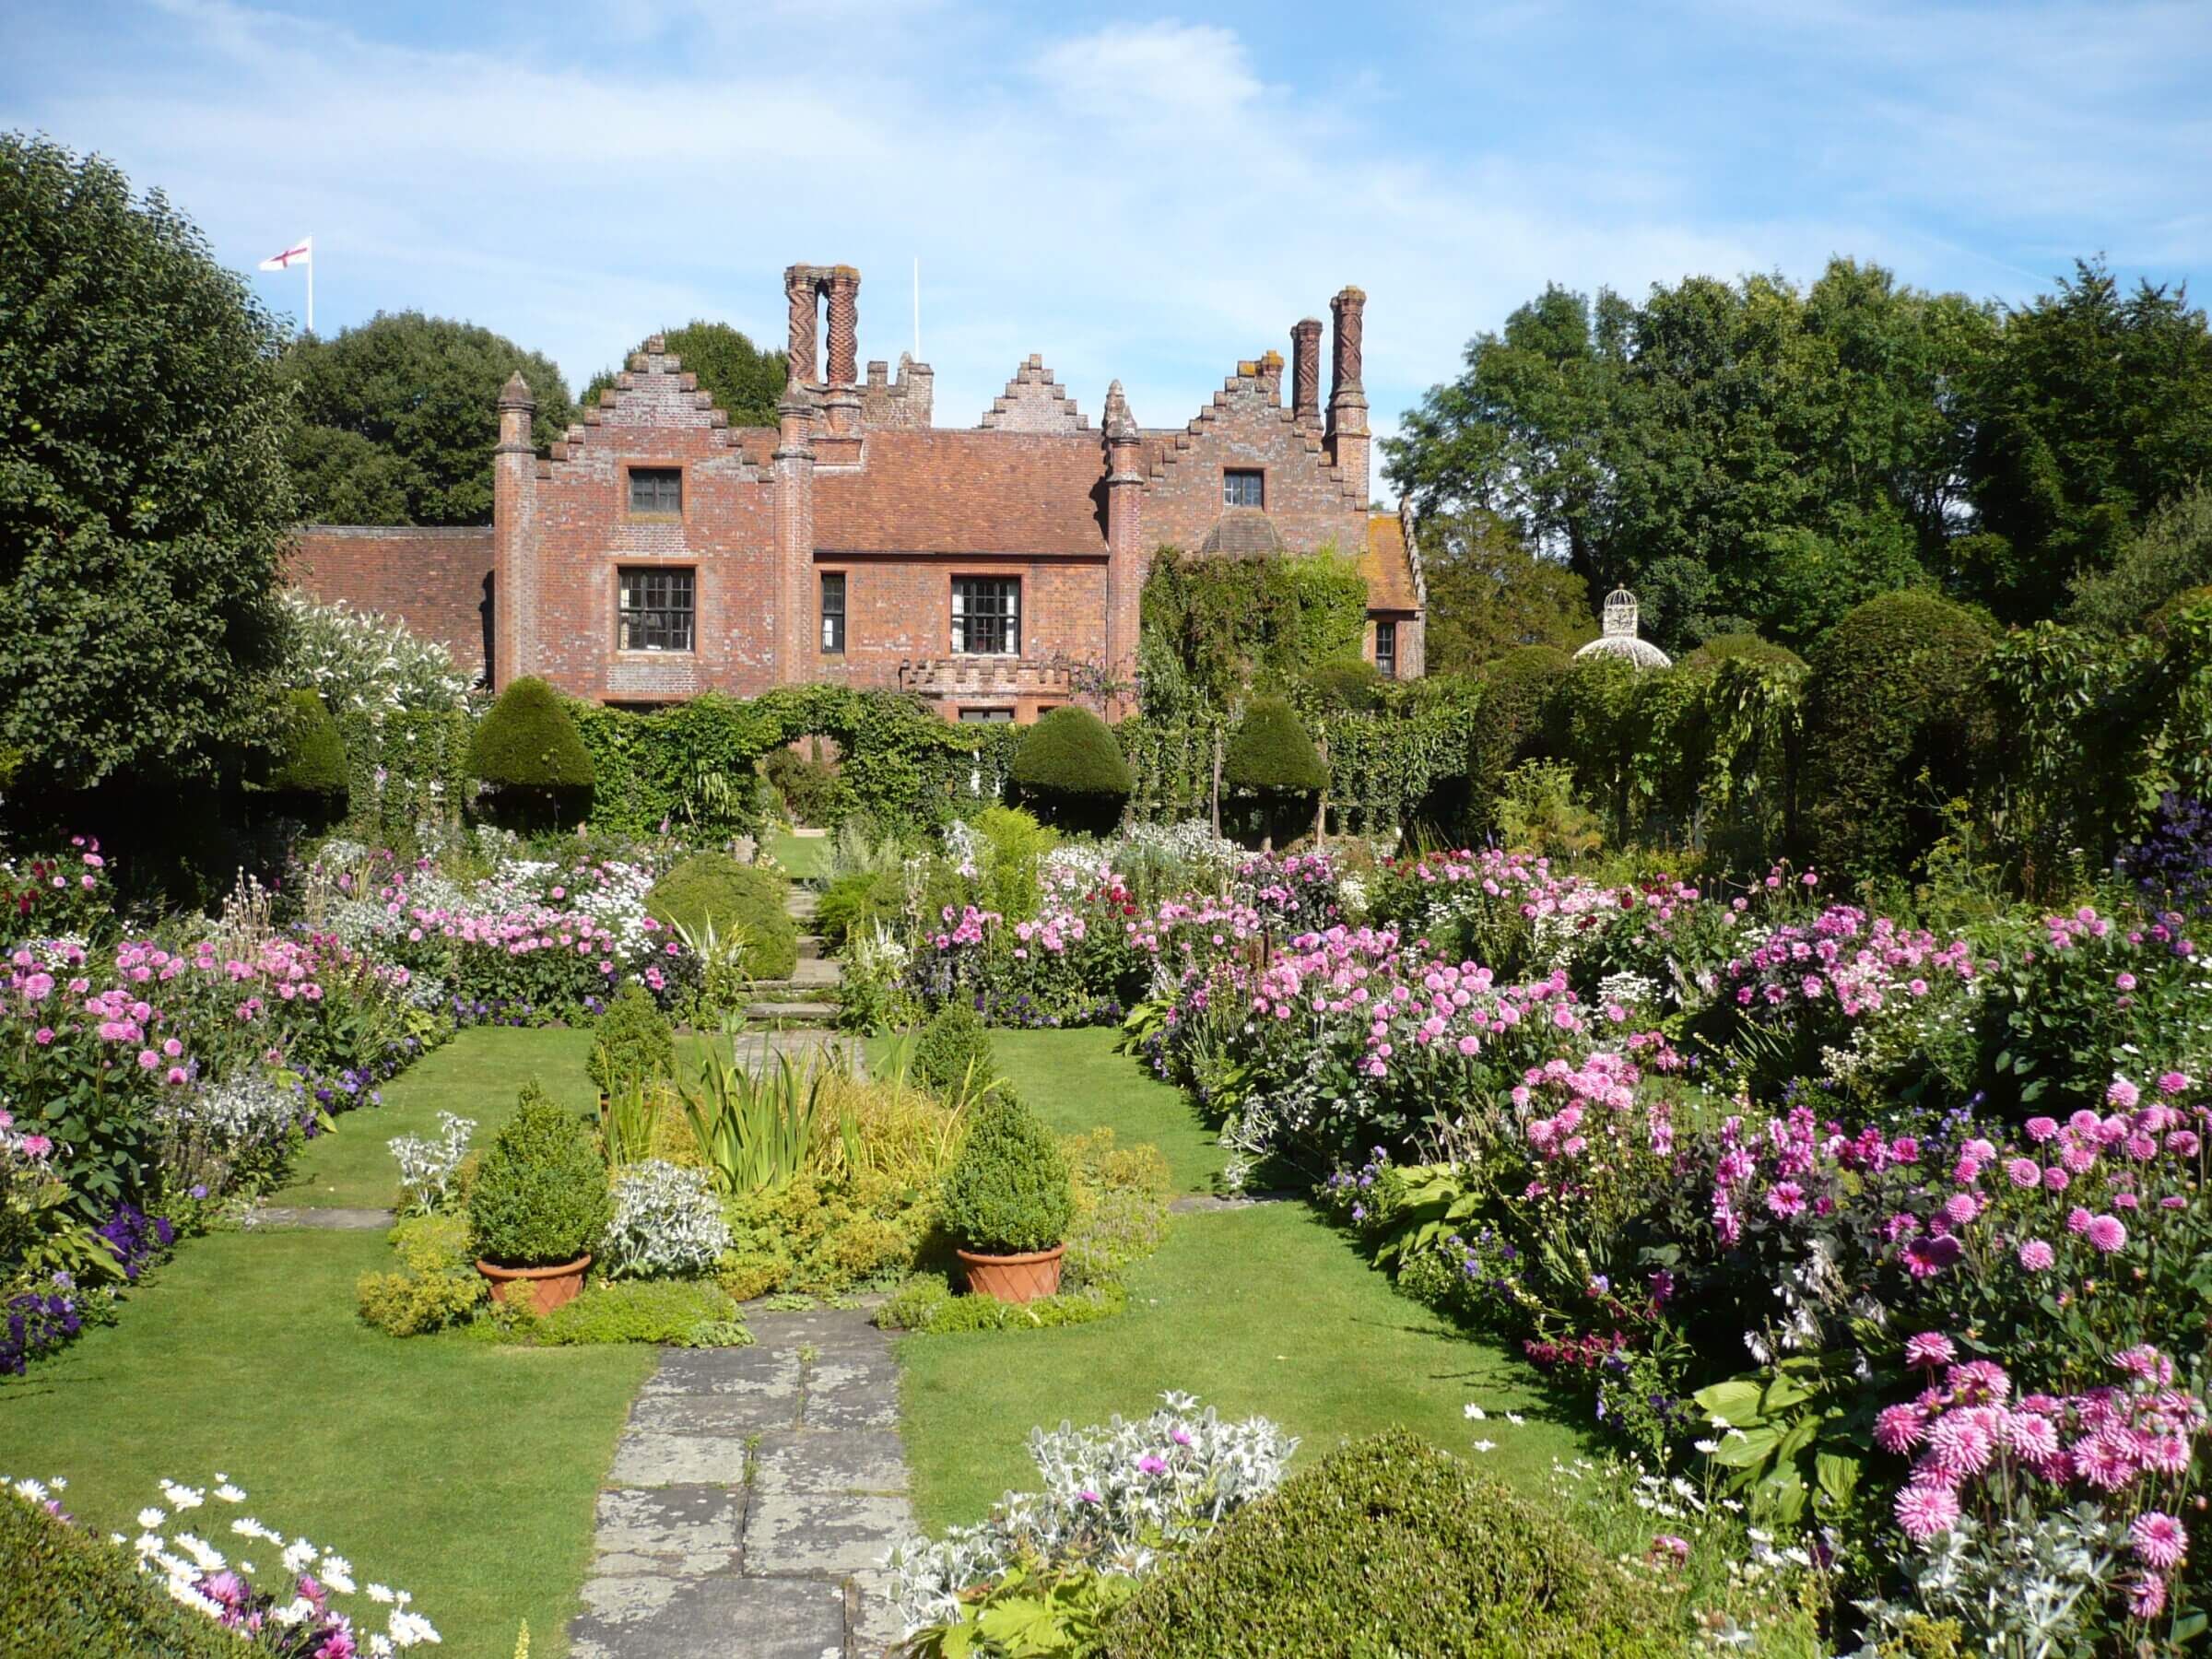 Image of rose garden in front of Chenies Manor House